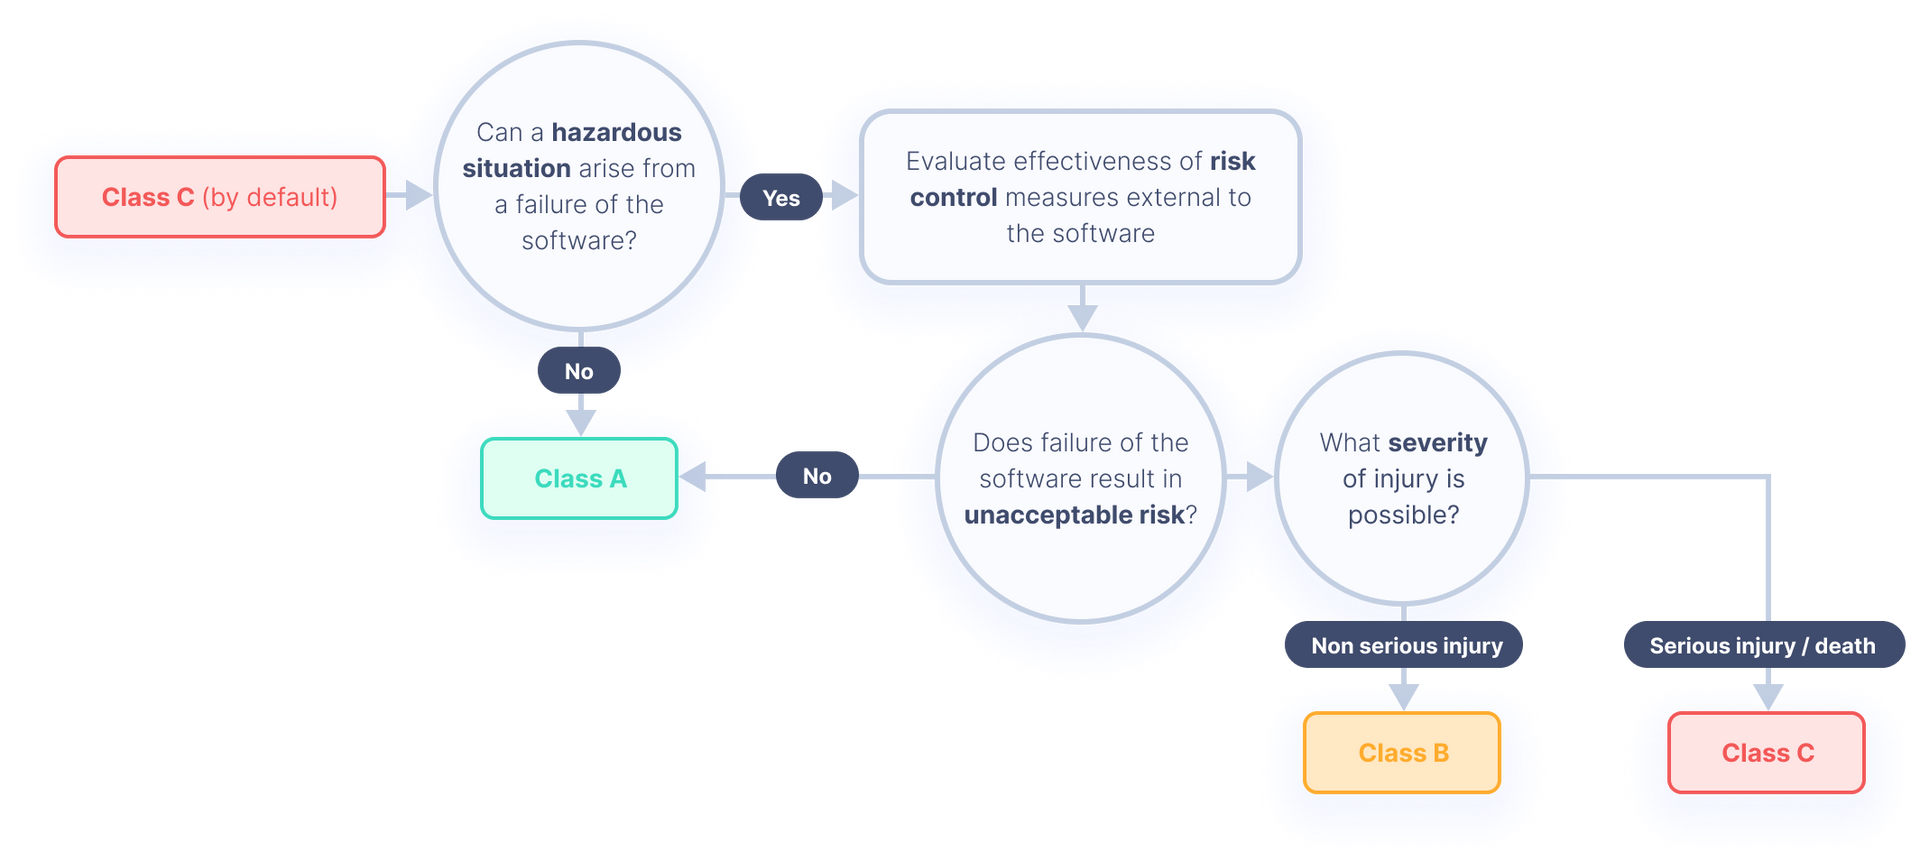 IEC 62304 Software Safety Classification Process